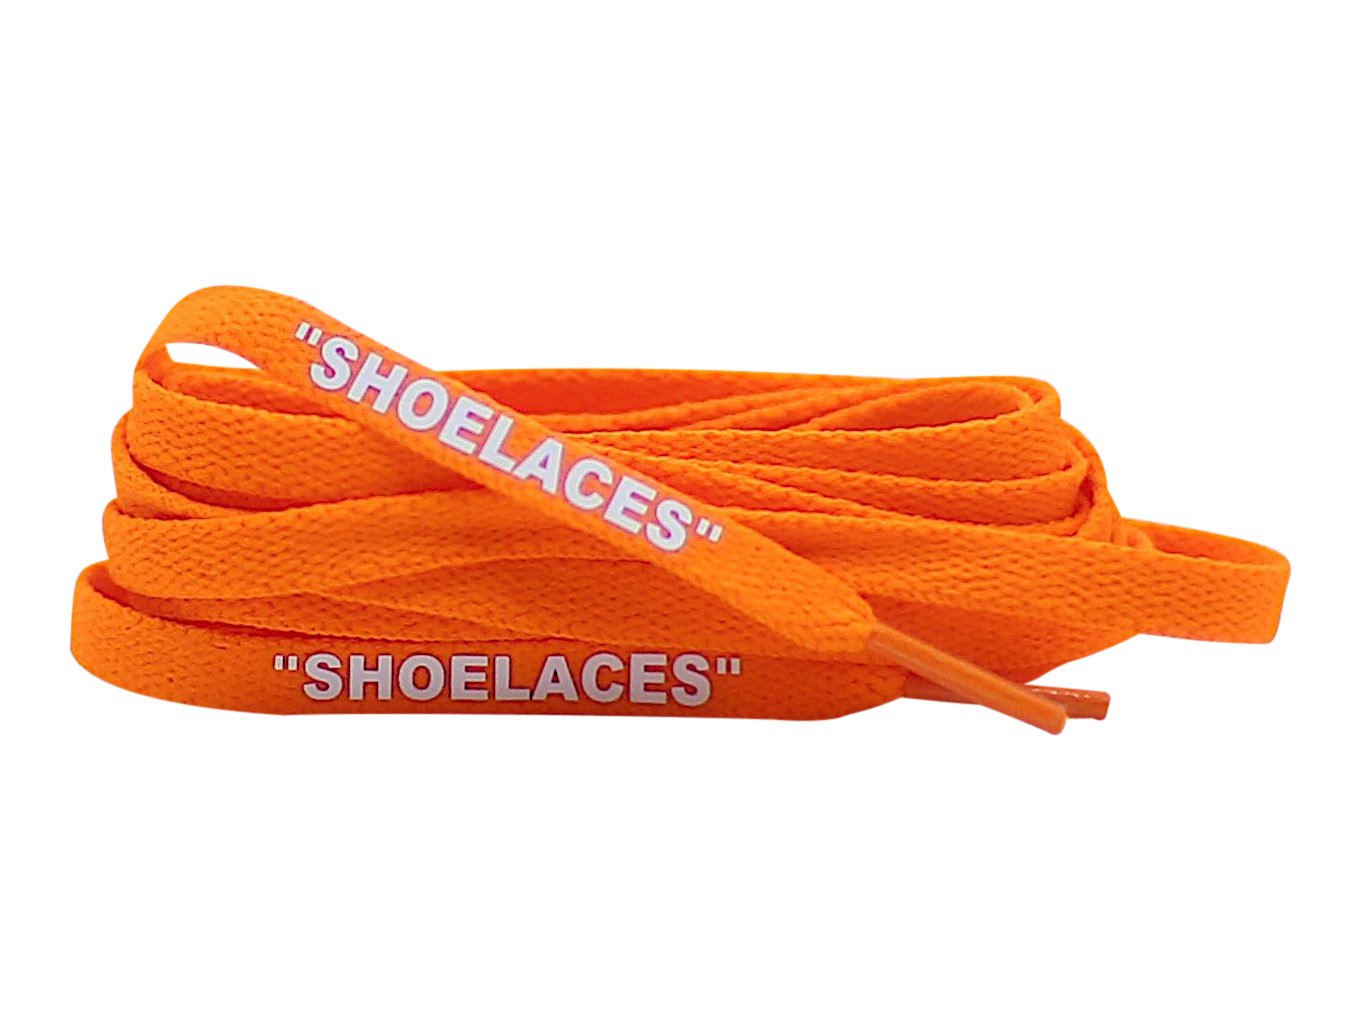 The And Shoelaces Near Me – Shoe Lace Supply